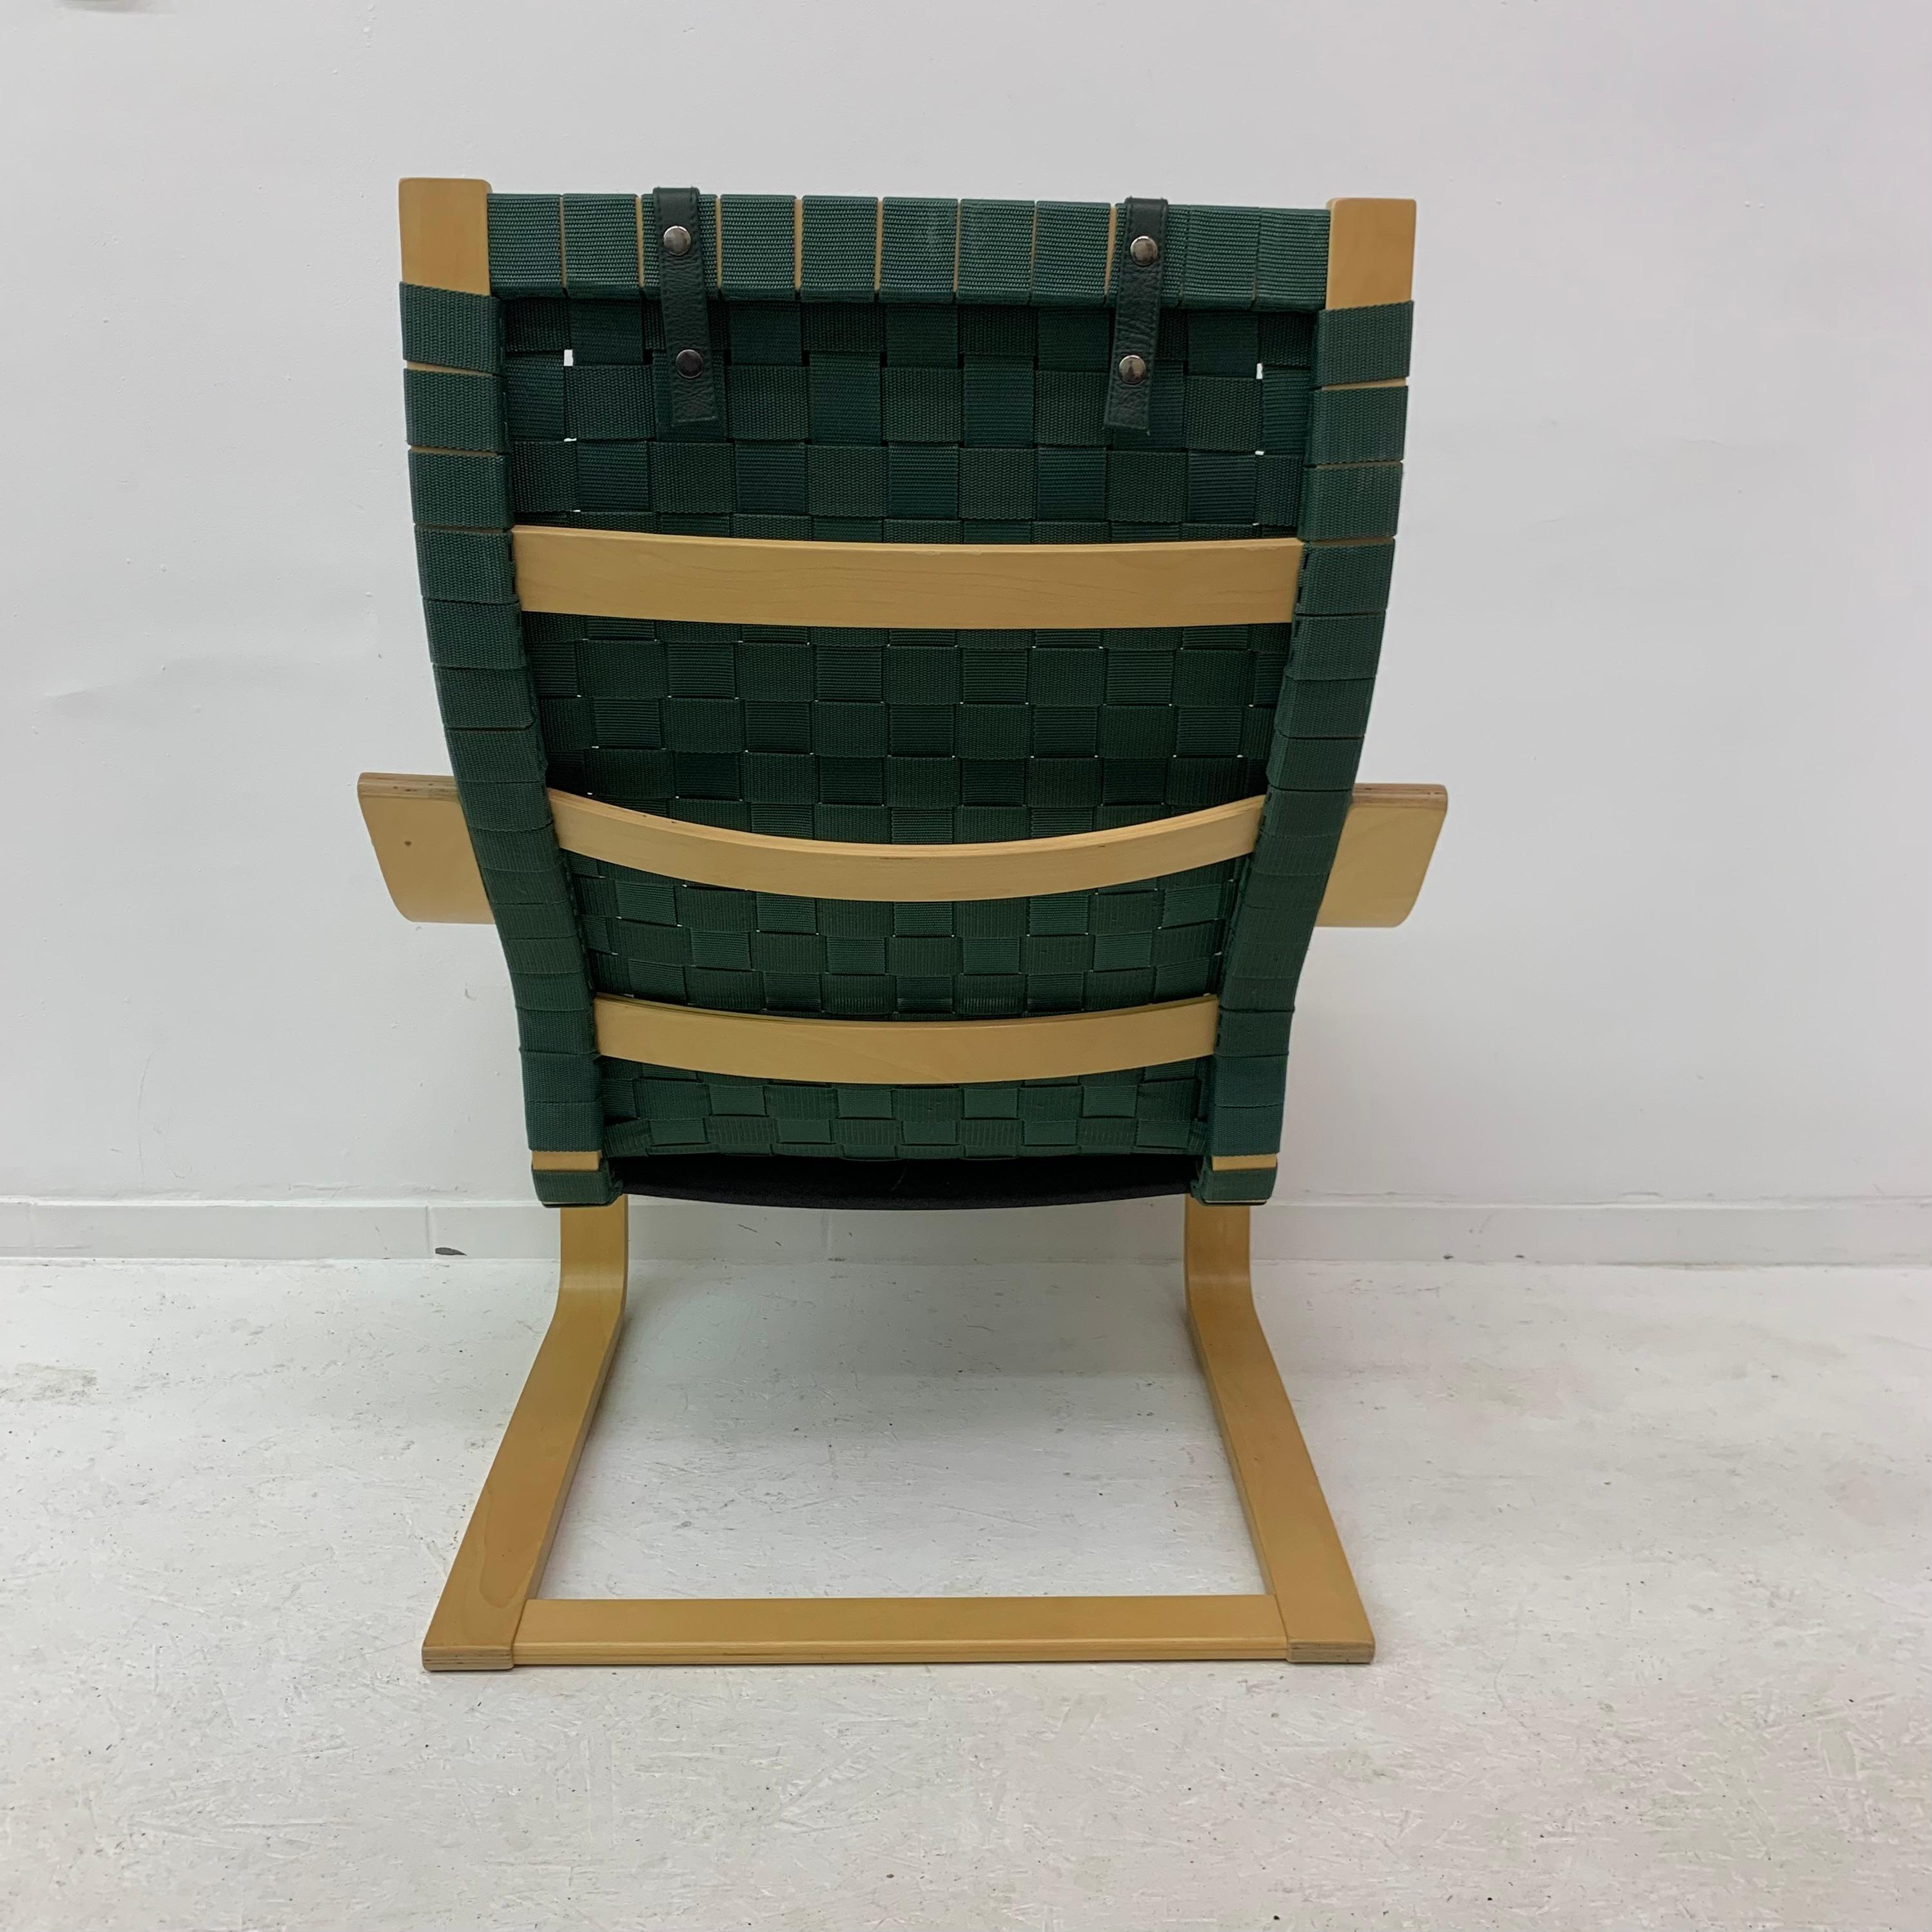 Limited Edition Aalto Tribute Points Chair by Noboru Nakamura for Ikea, 1999 For Sale 8